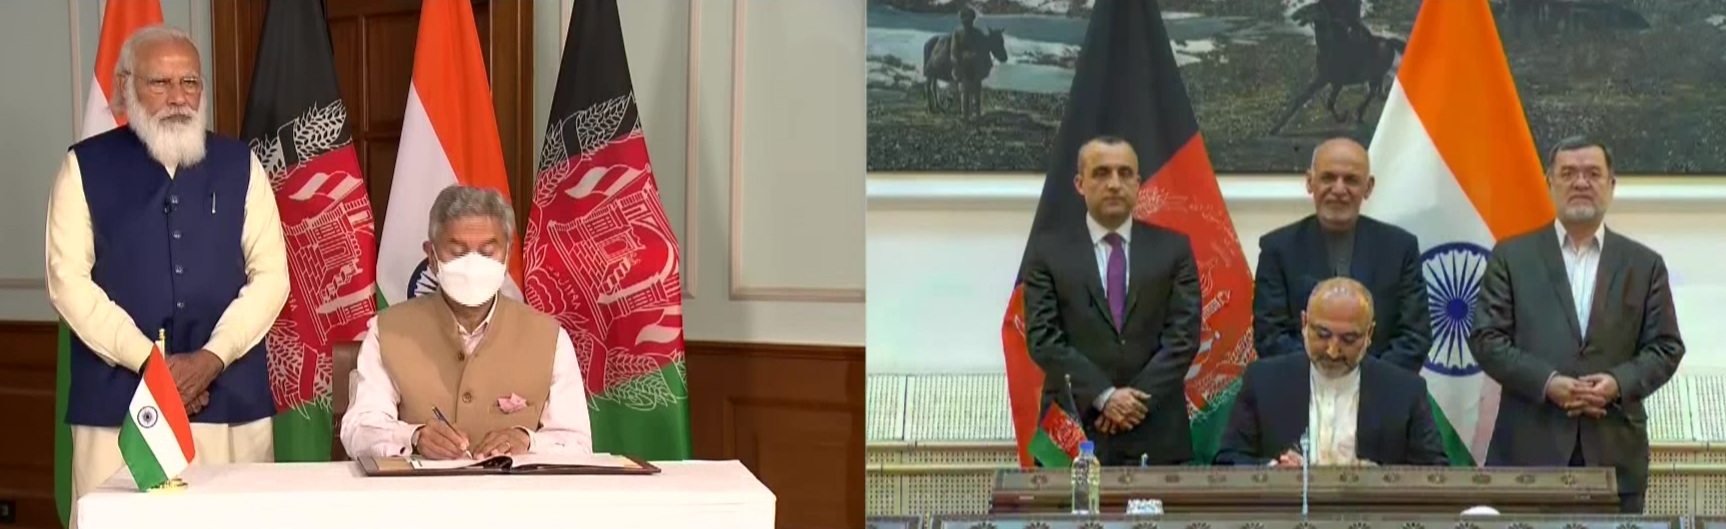 India, Afghanistan sign MoU on Shahtoot dam